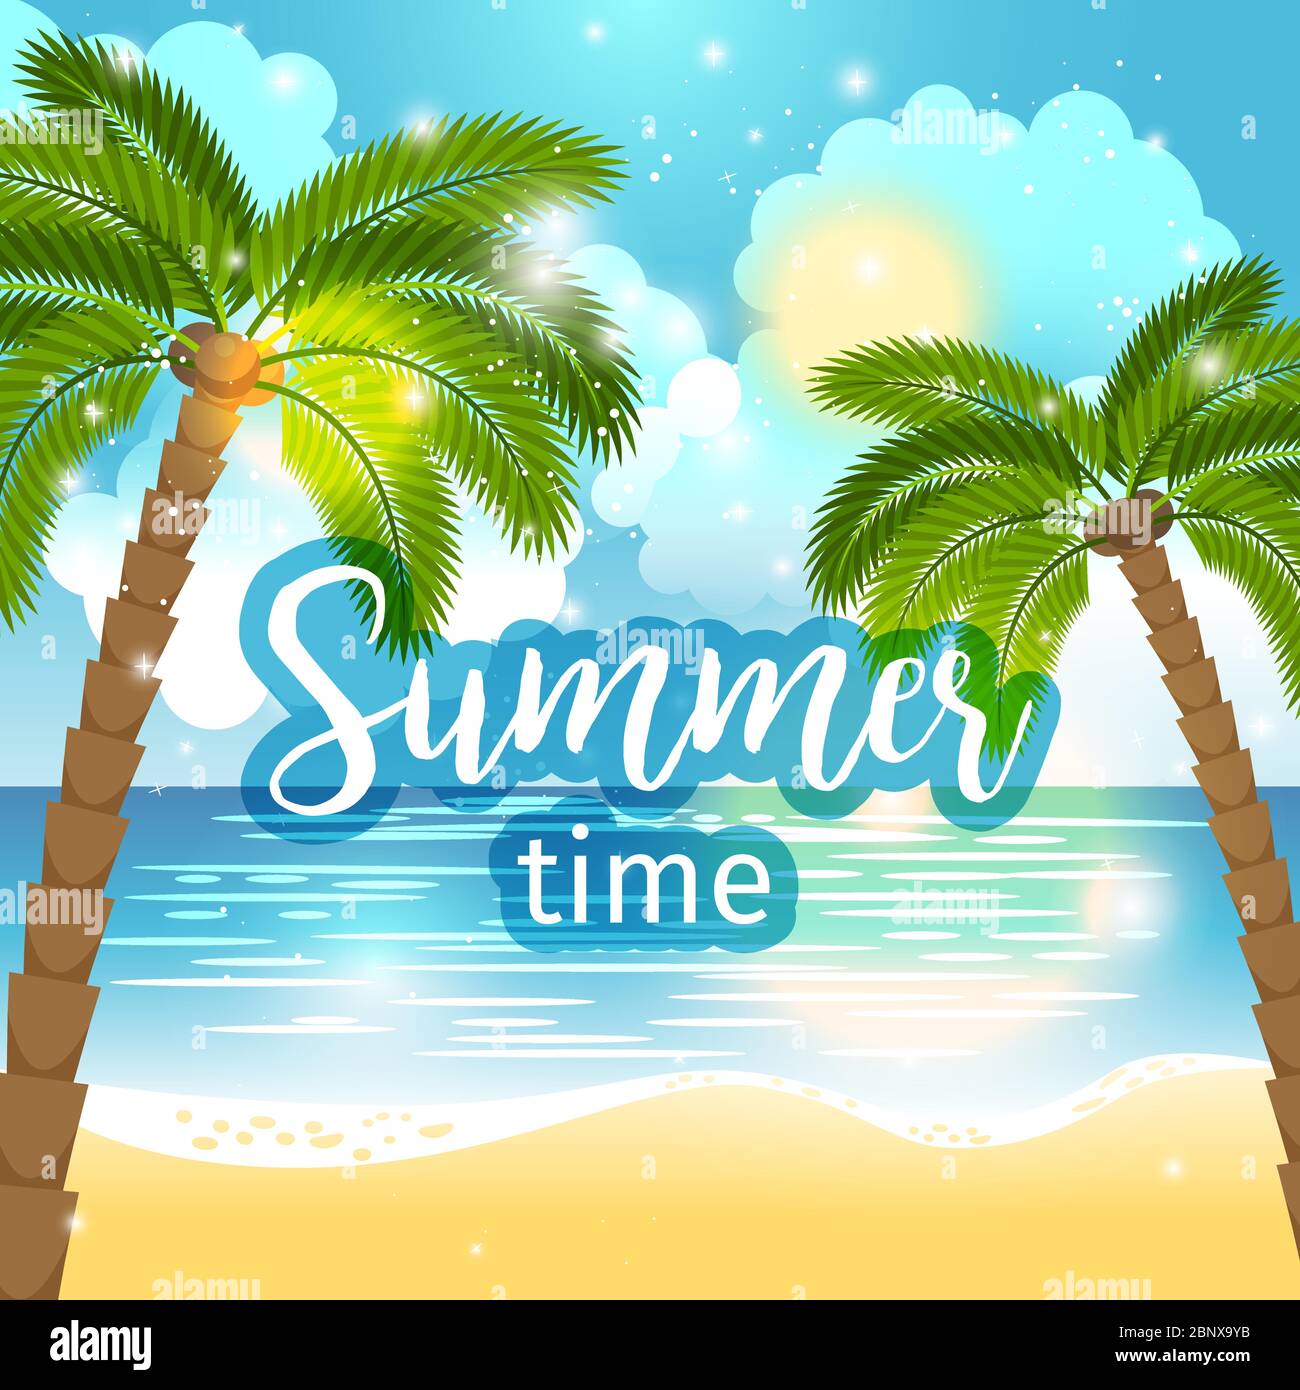 Summer time sea view background. Ocean and palm trees seaside blue design. Vector illustration Stock Vector